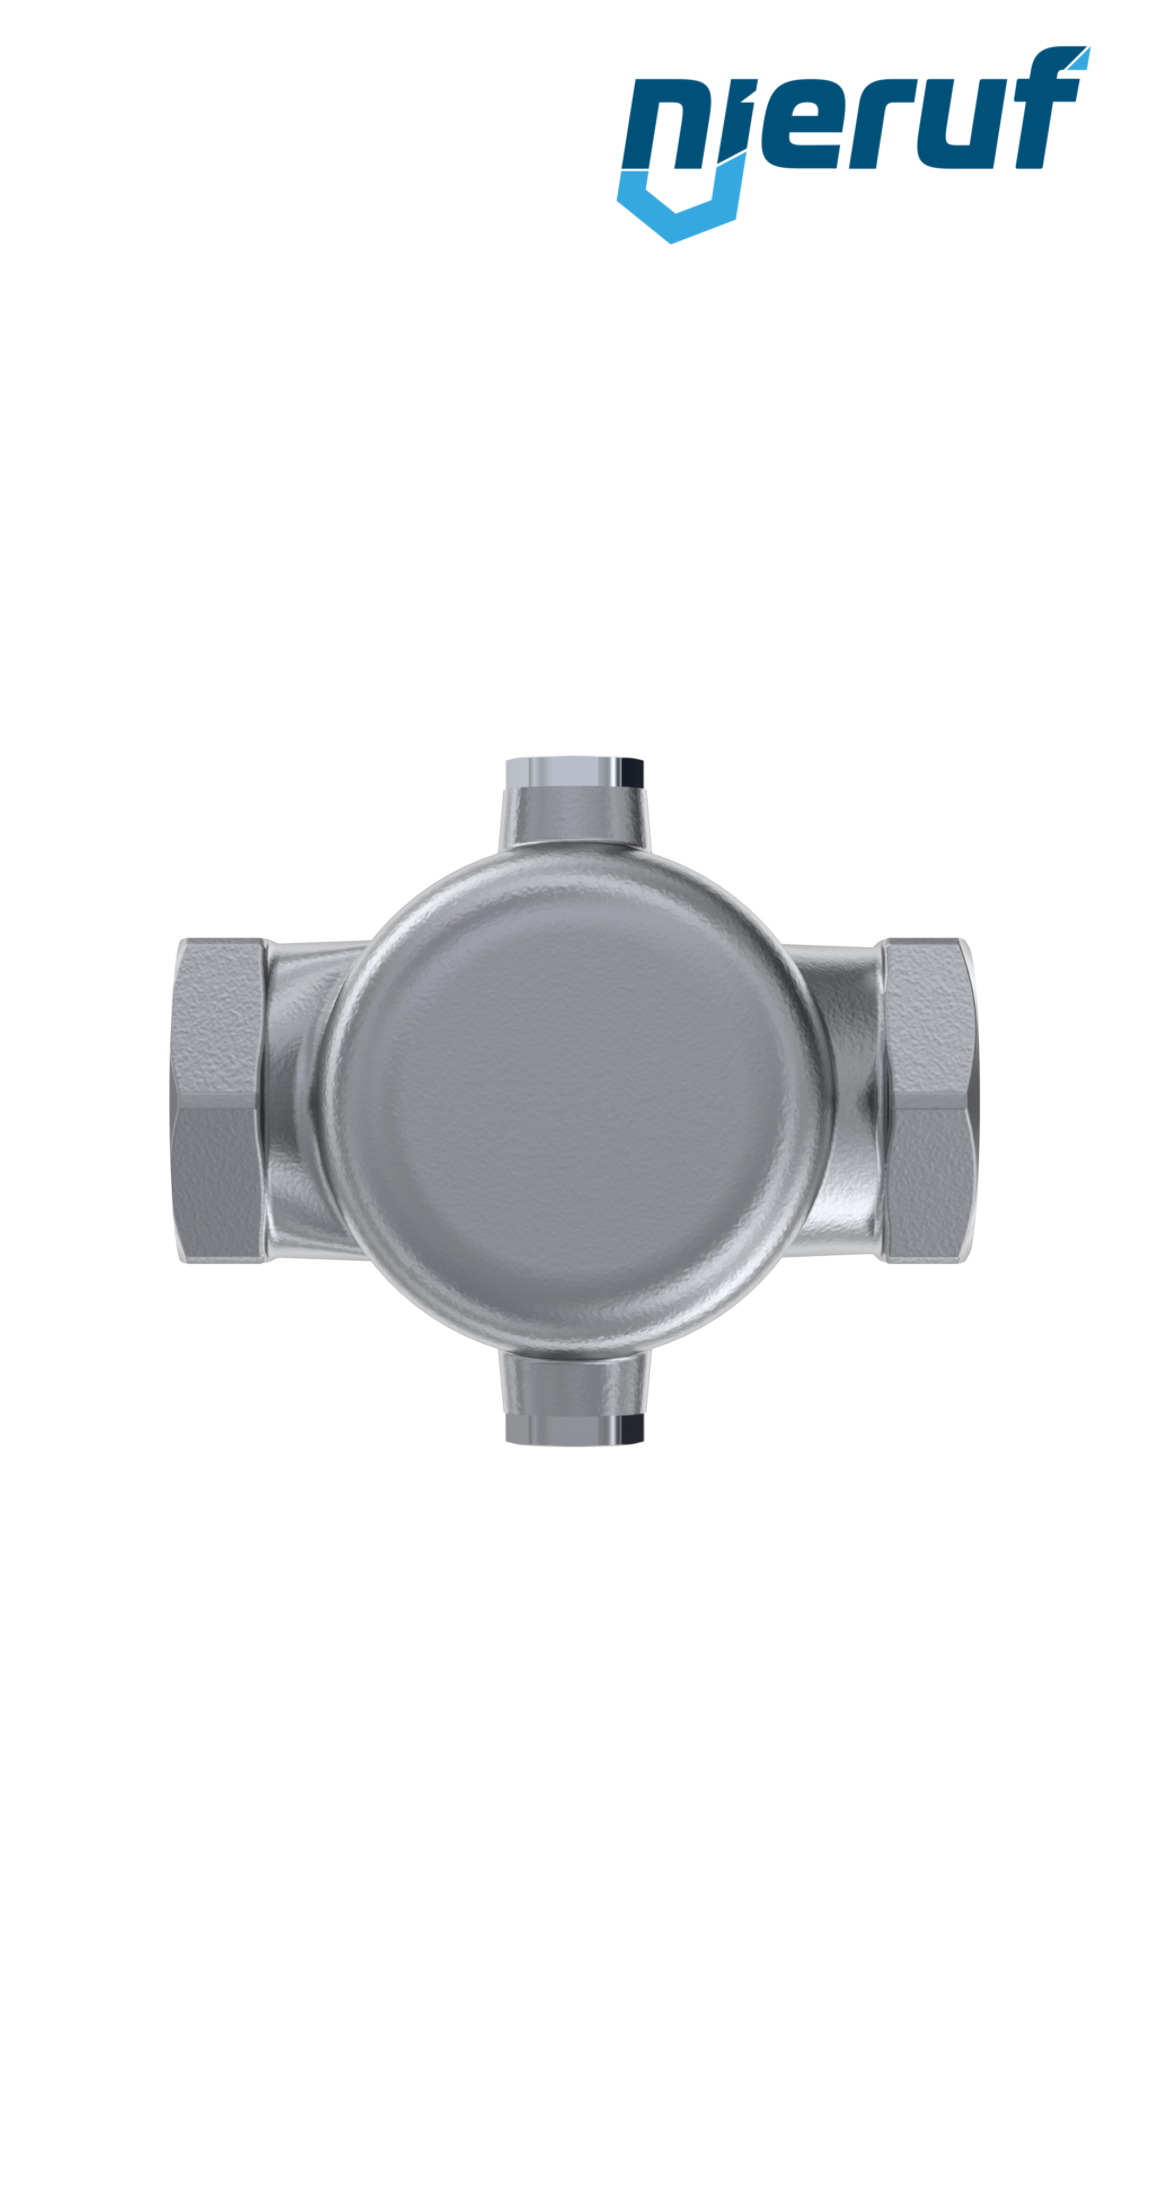 straightway form overflow valve 1" inch female UV07 stainless steel AISI 316L 0,5 - 2,0 bar